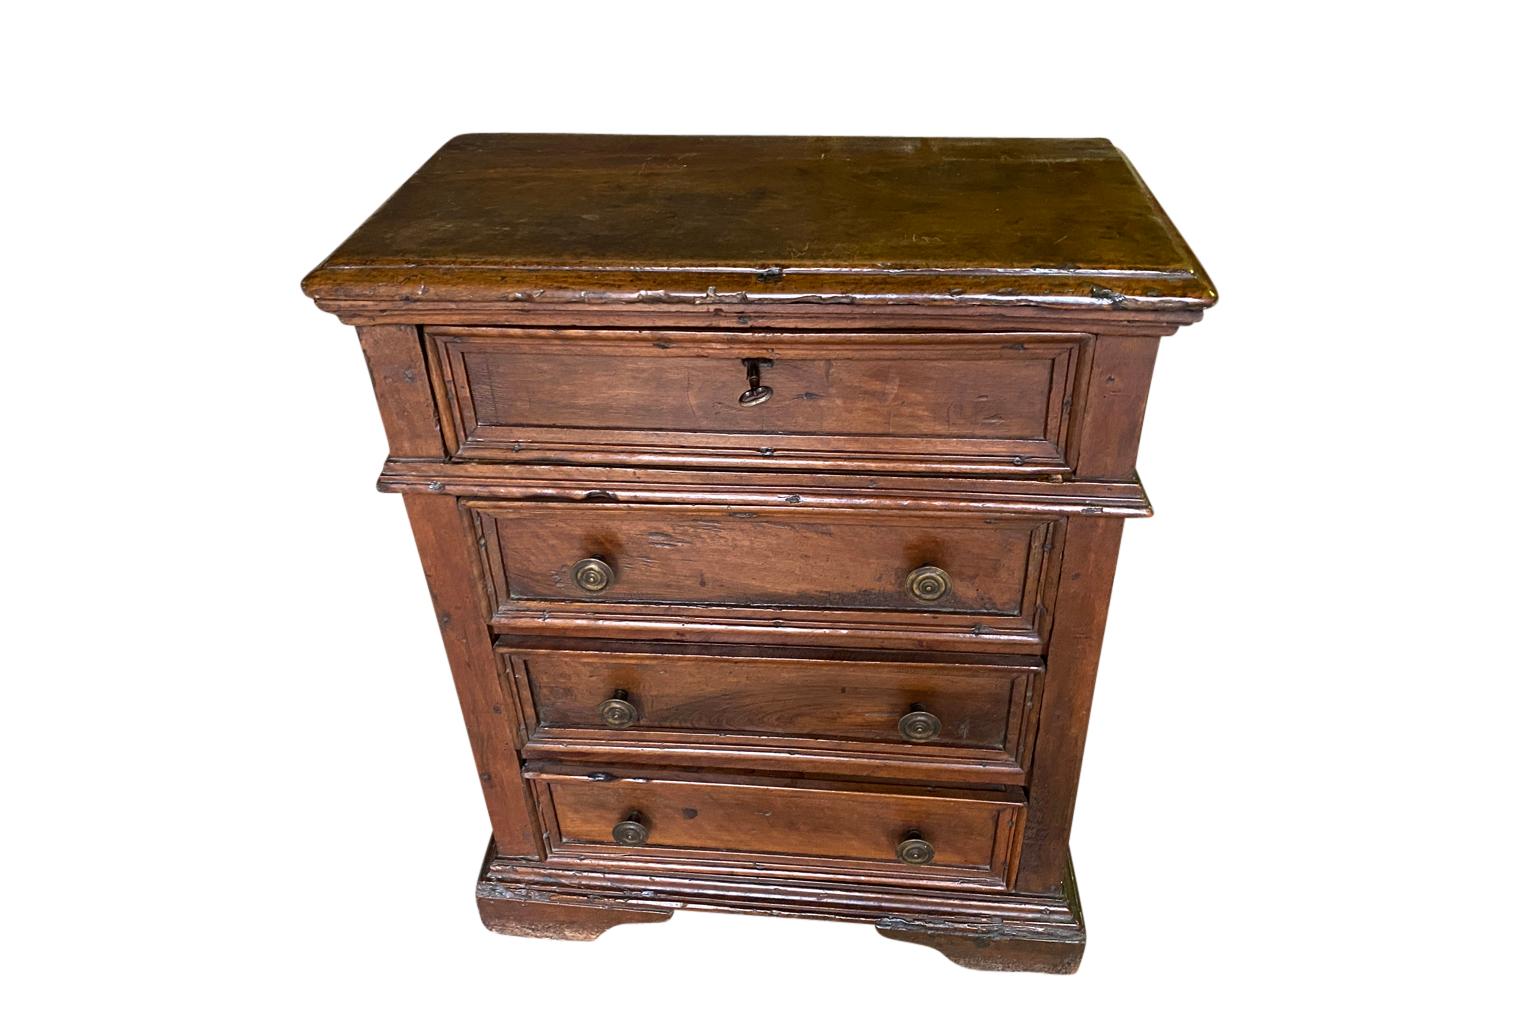 A striking 18th century Comodini from the Lombardy region of Italy. Handsomely constructed from solid walnut with a rectangular top atop a case housing four drawers with antique patinated brass pulls raised on bracket feet.